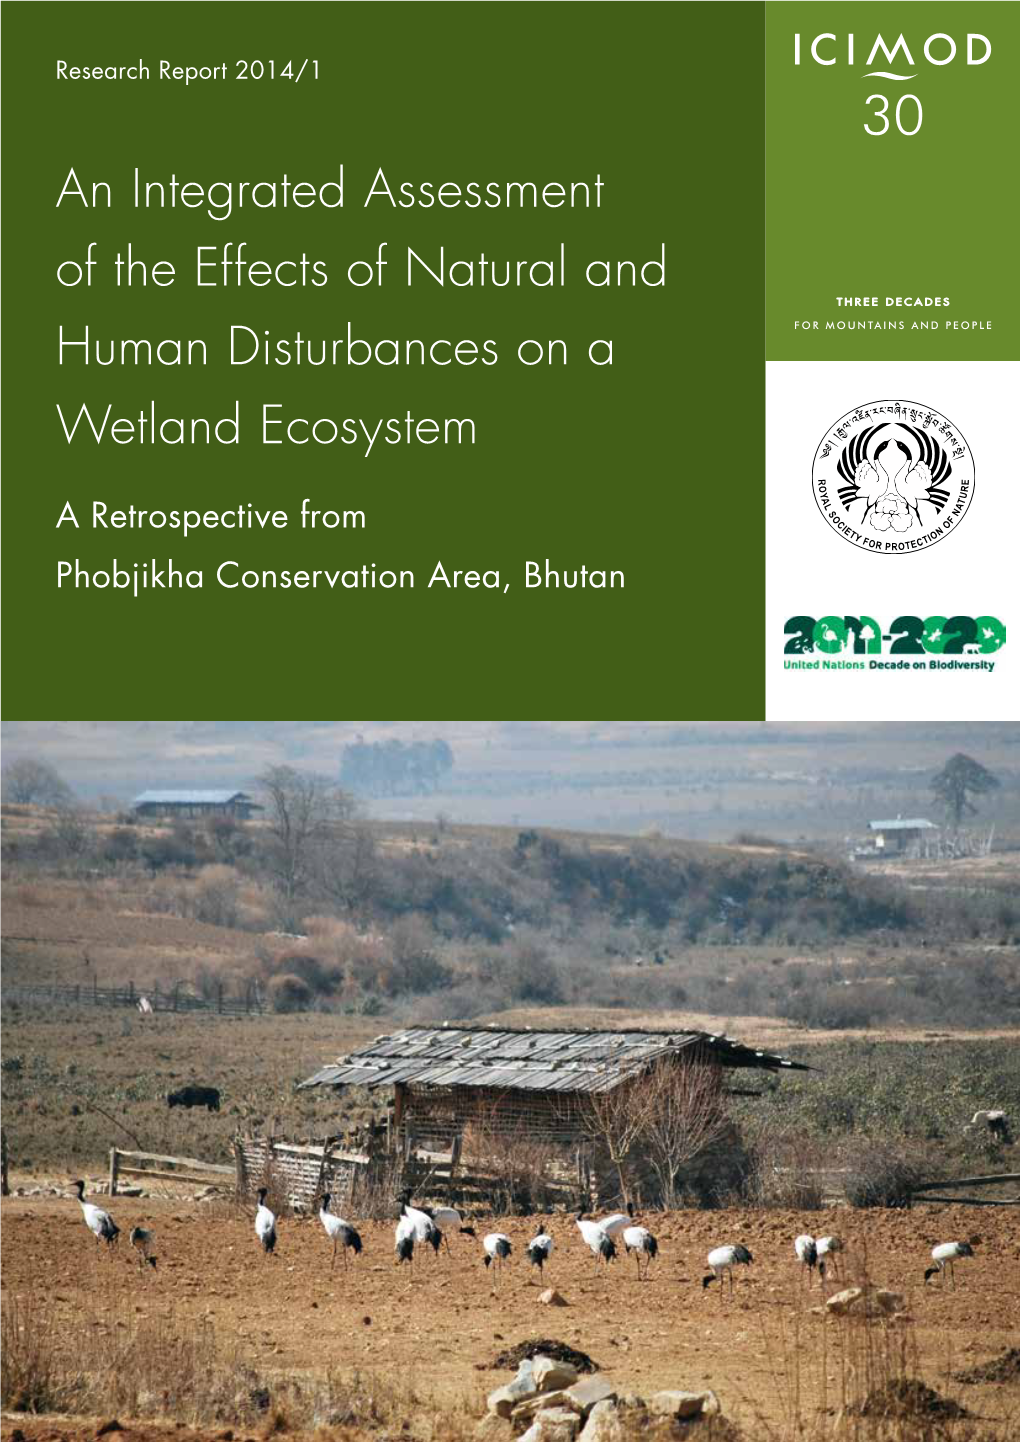 An Integrated Assessment of the Effects of Natural and Human Disturbances on a Wetland Ecosystem